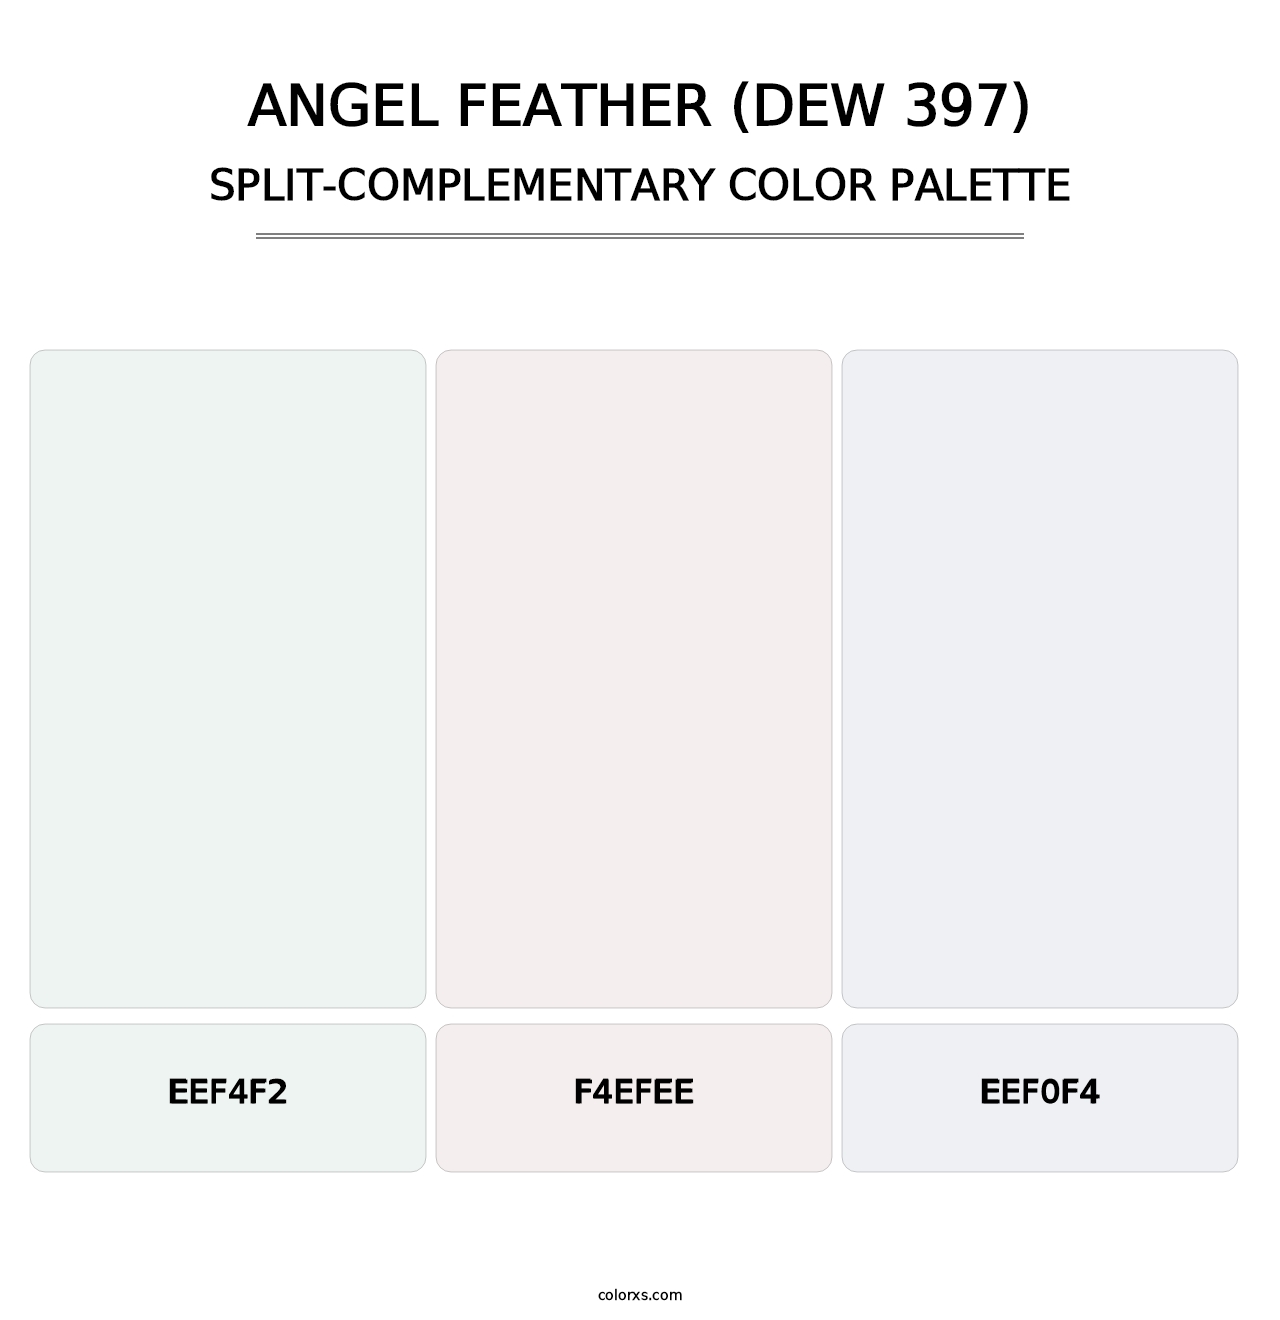 Angel Feather (DEW 397) - Split-Complementary Color Palette